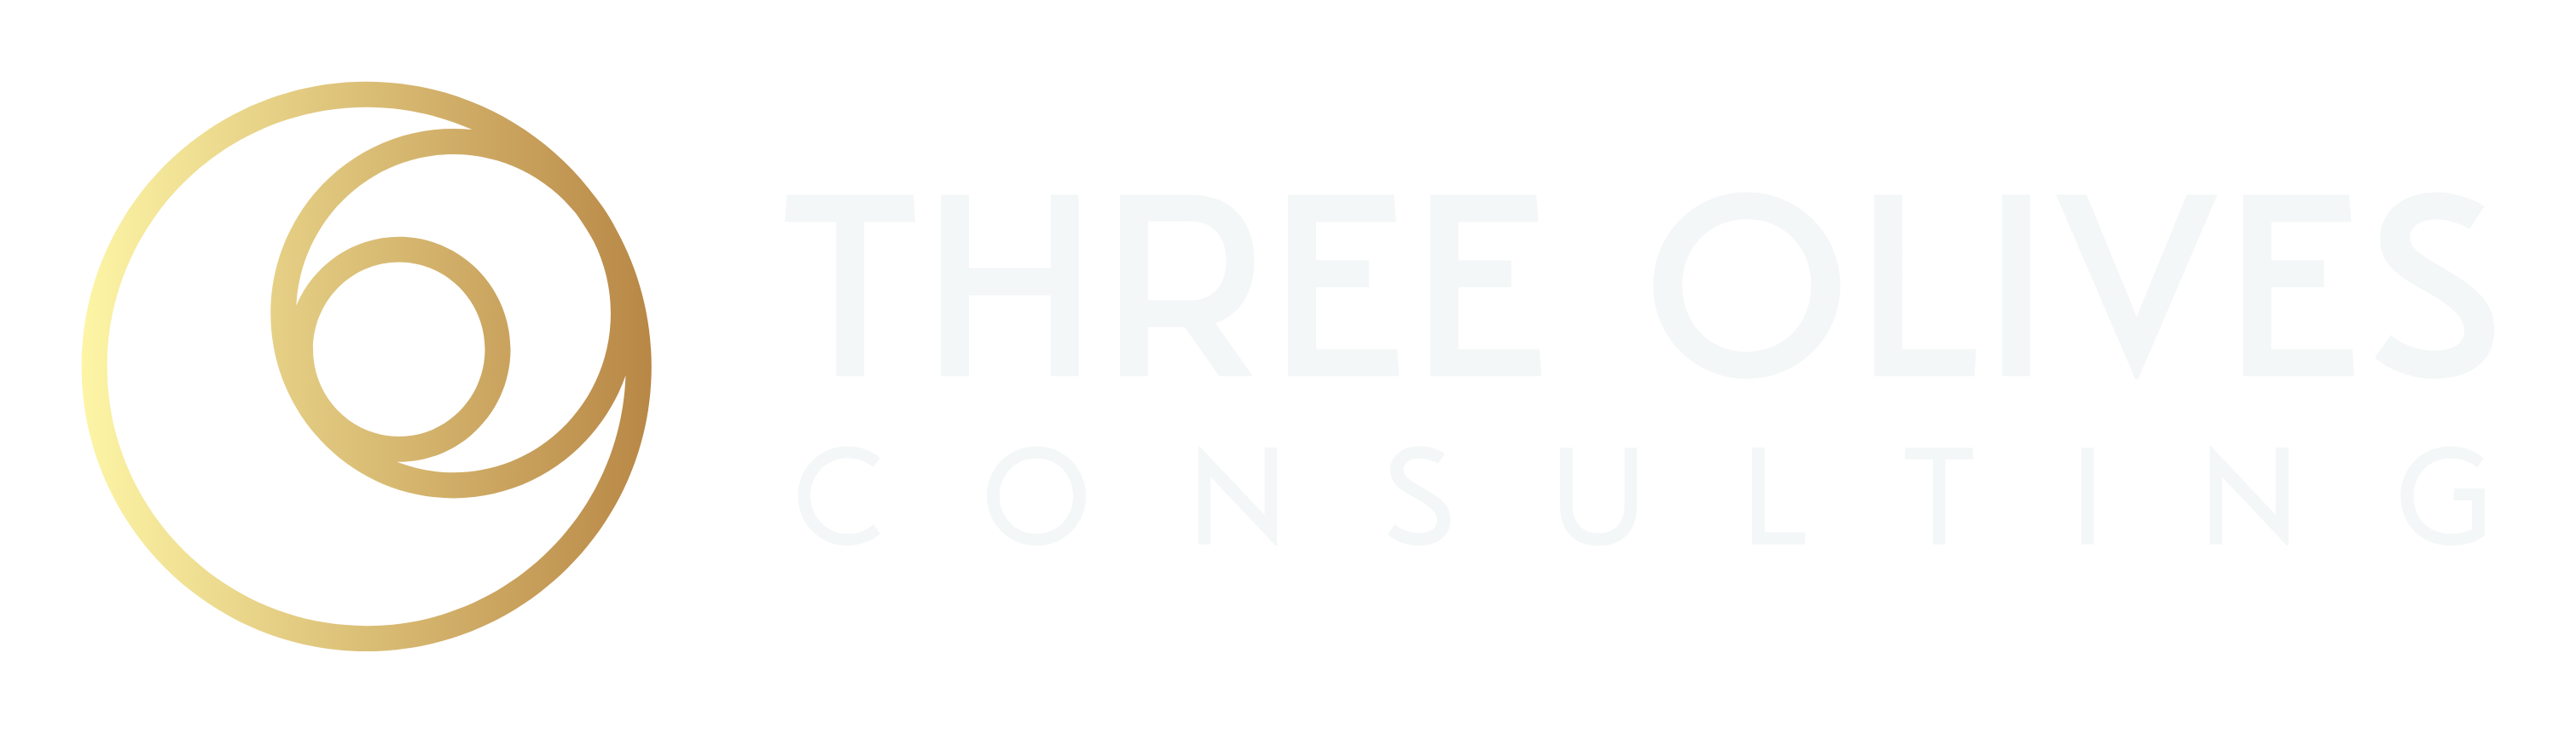 Three Olives Consulting Group